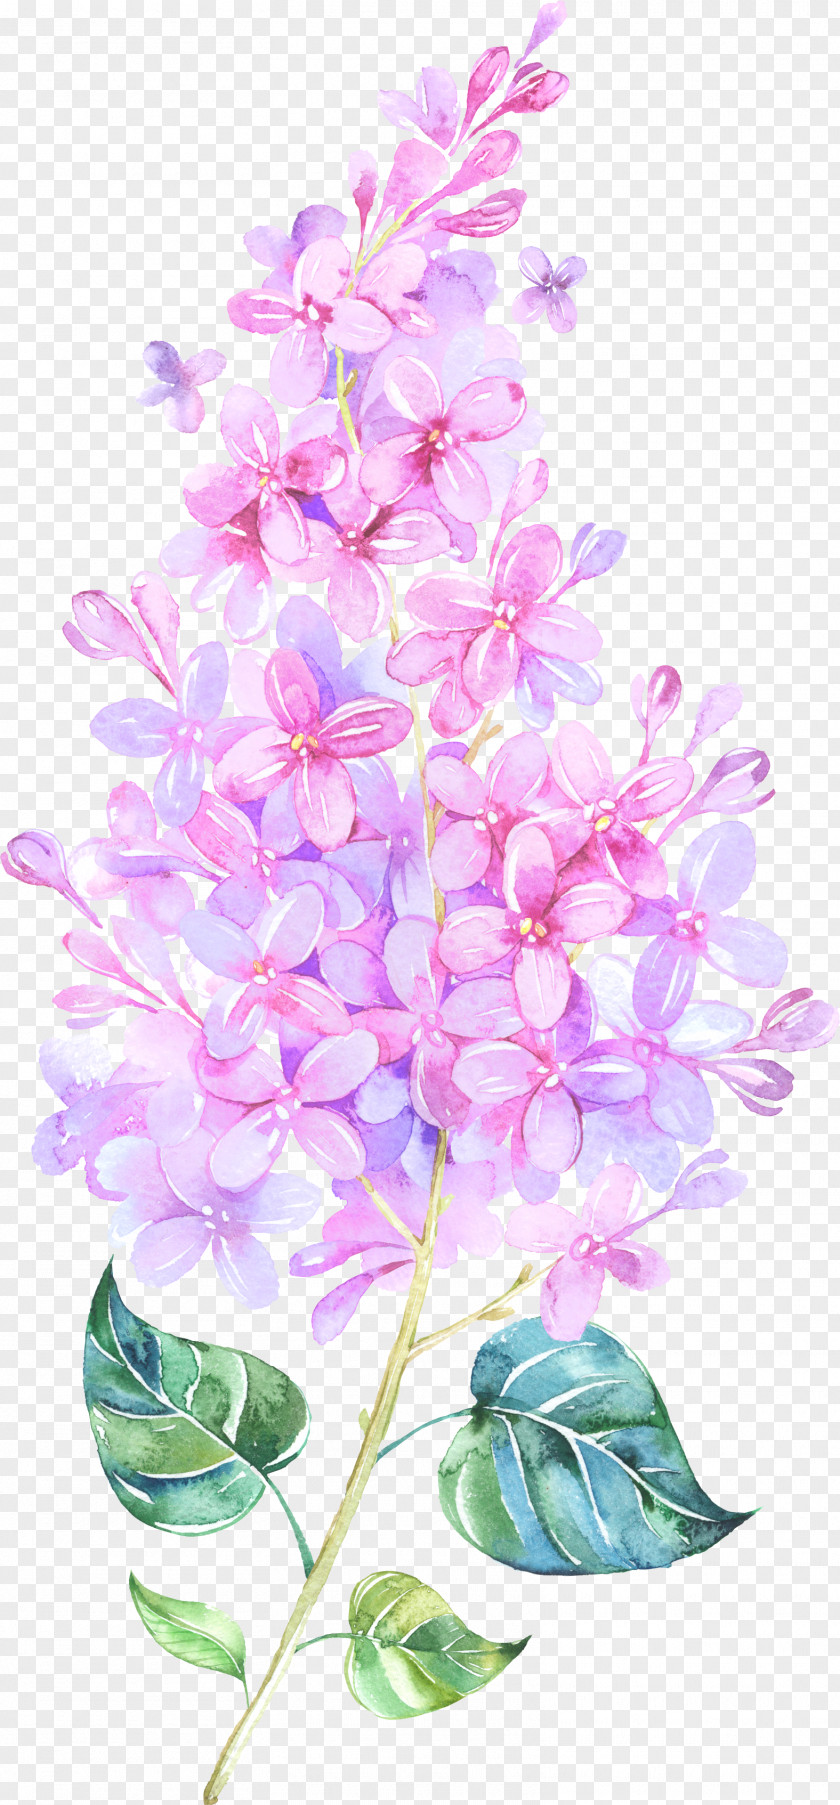 Floating Flower Paper Watercolor Painting Clip Art PNG